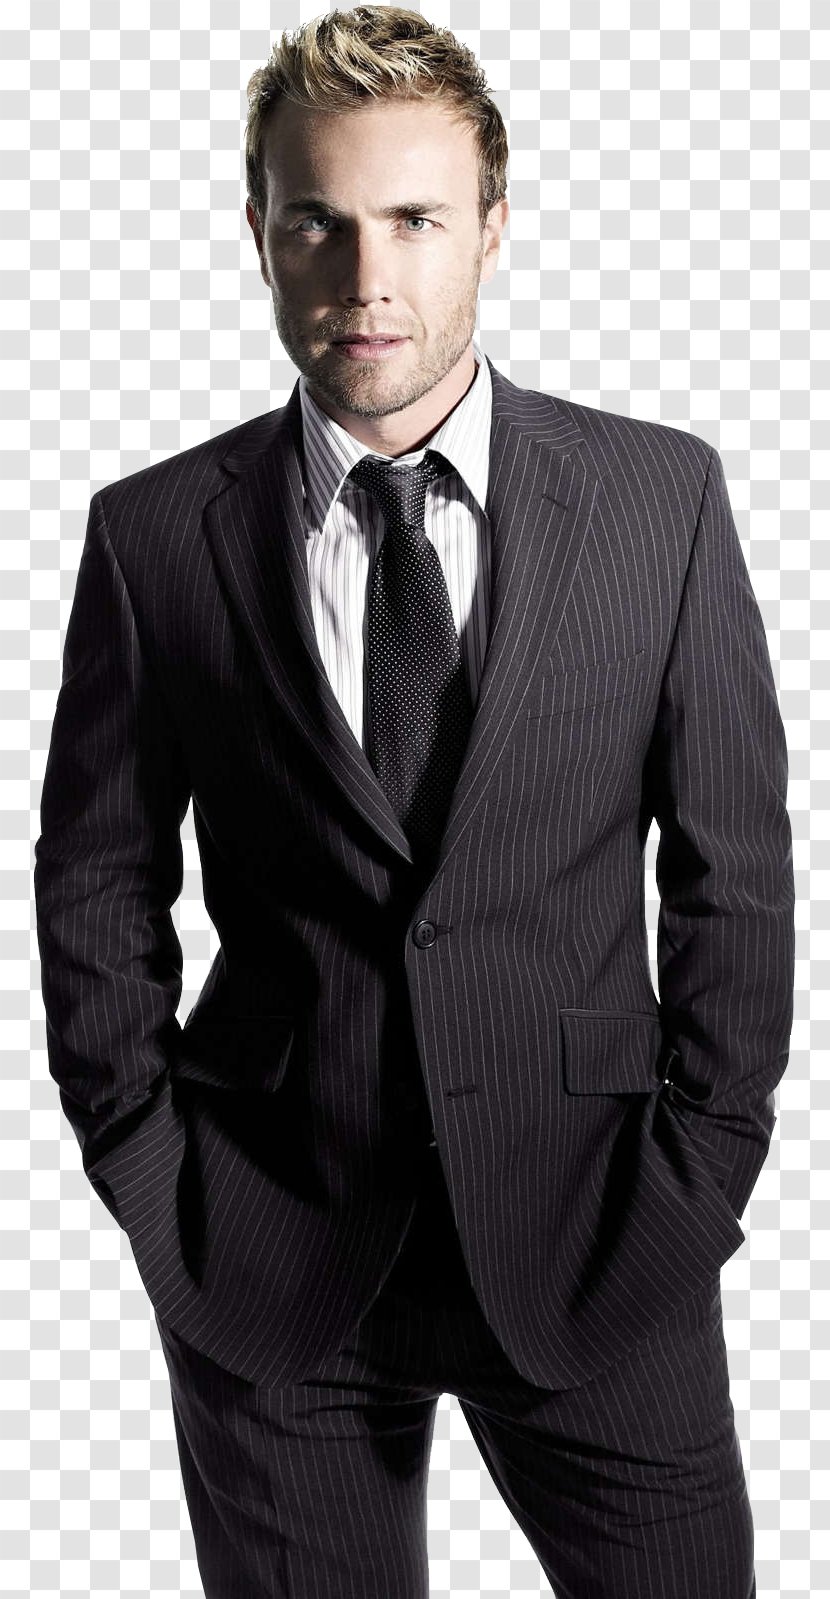 Gary Barlow The X Factor Take That [Interview] Suit - Formal Wear - Tuxedo Transparent PNG